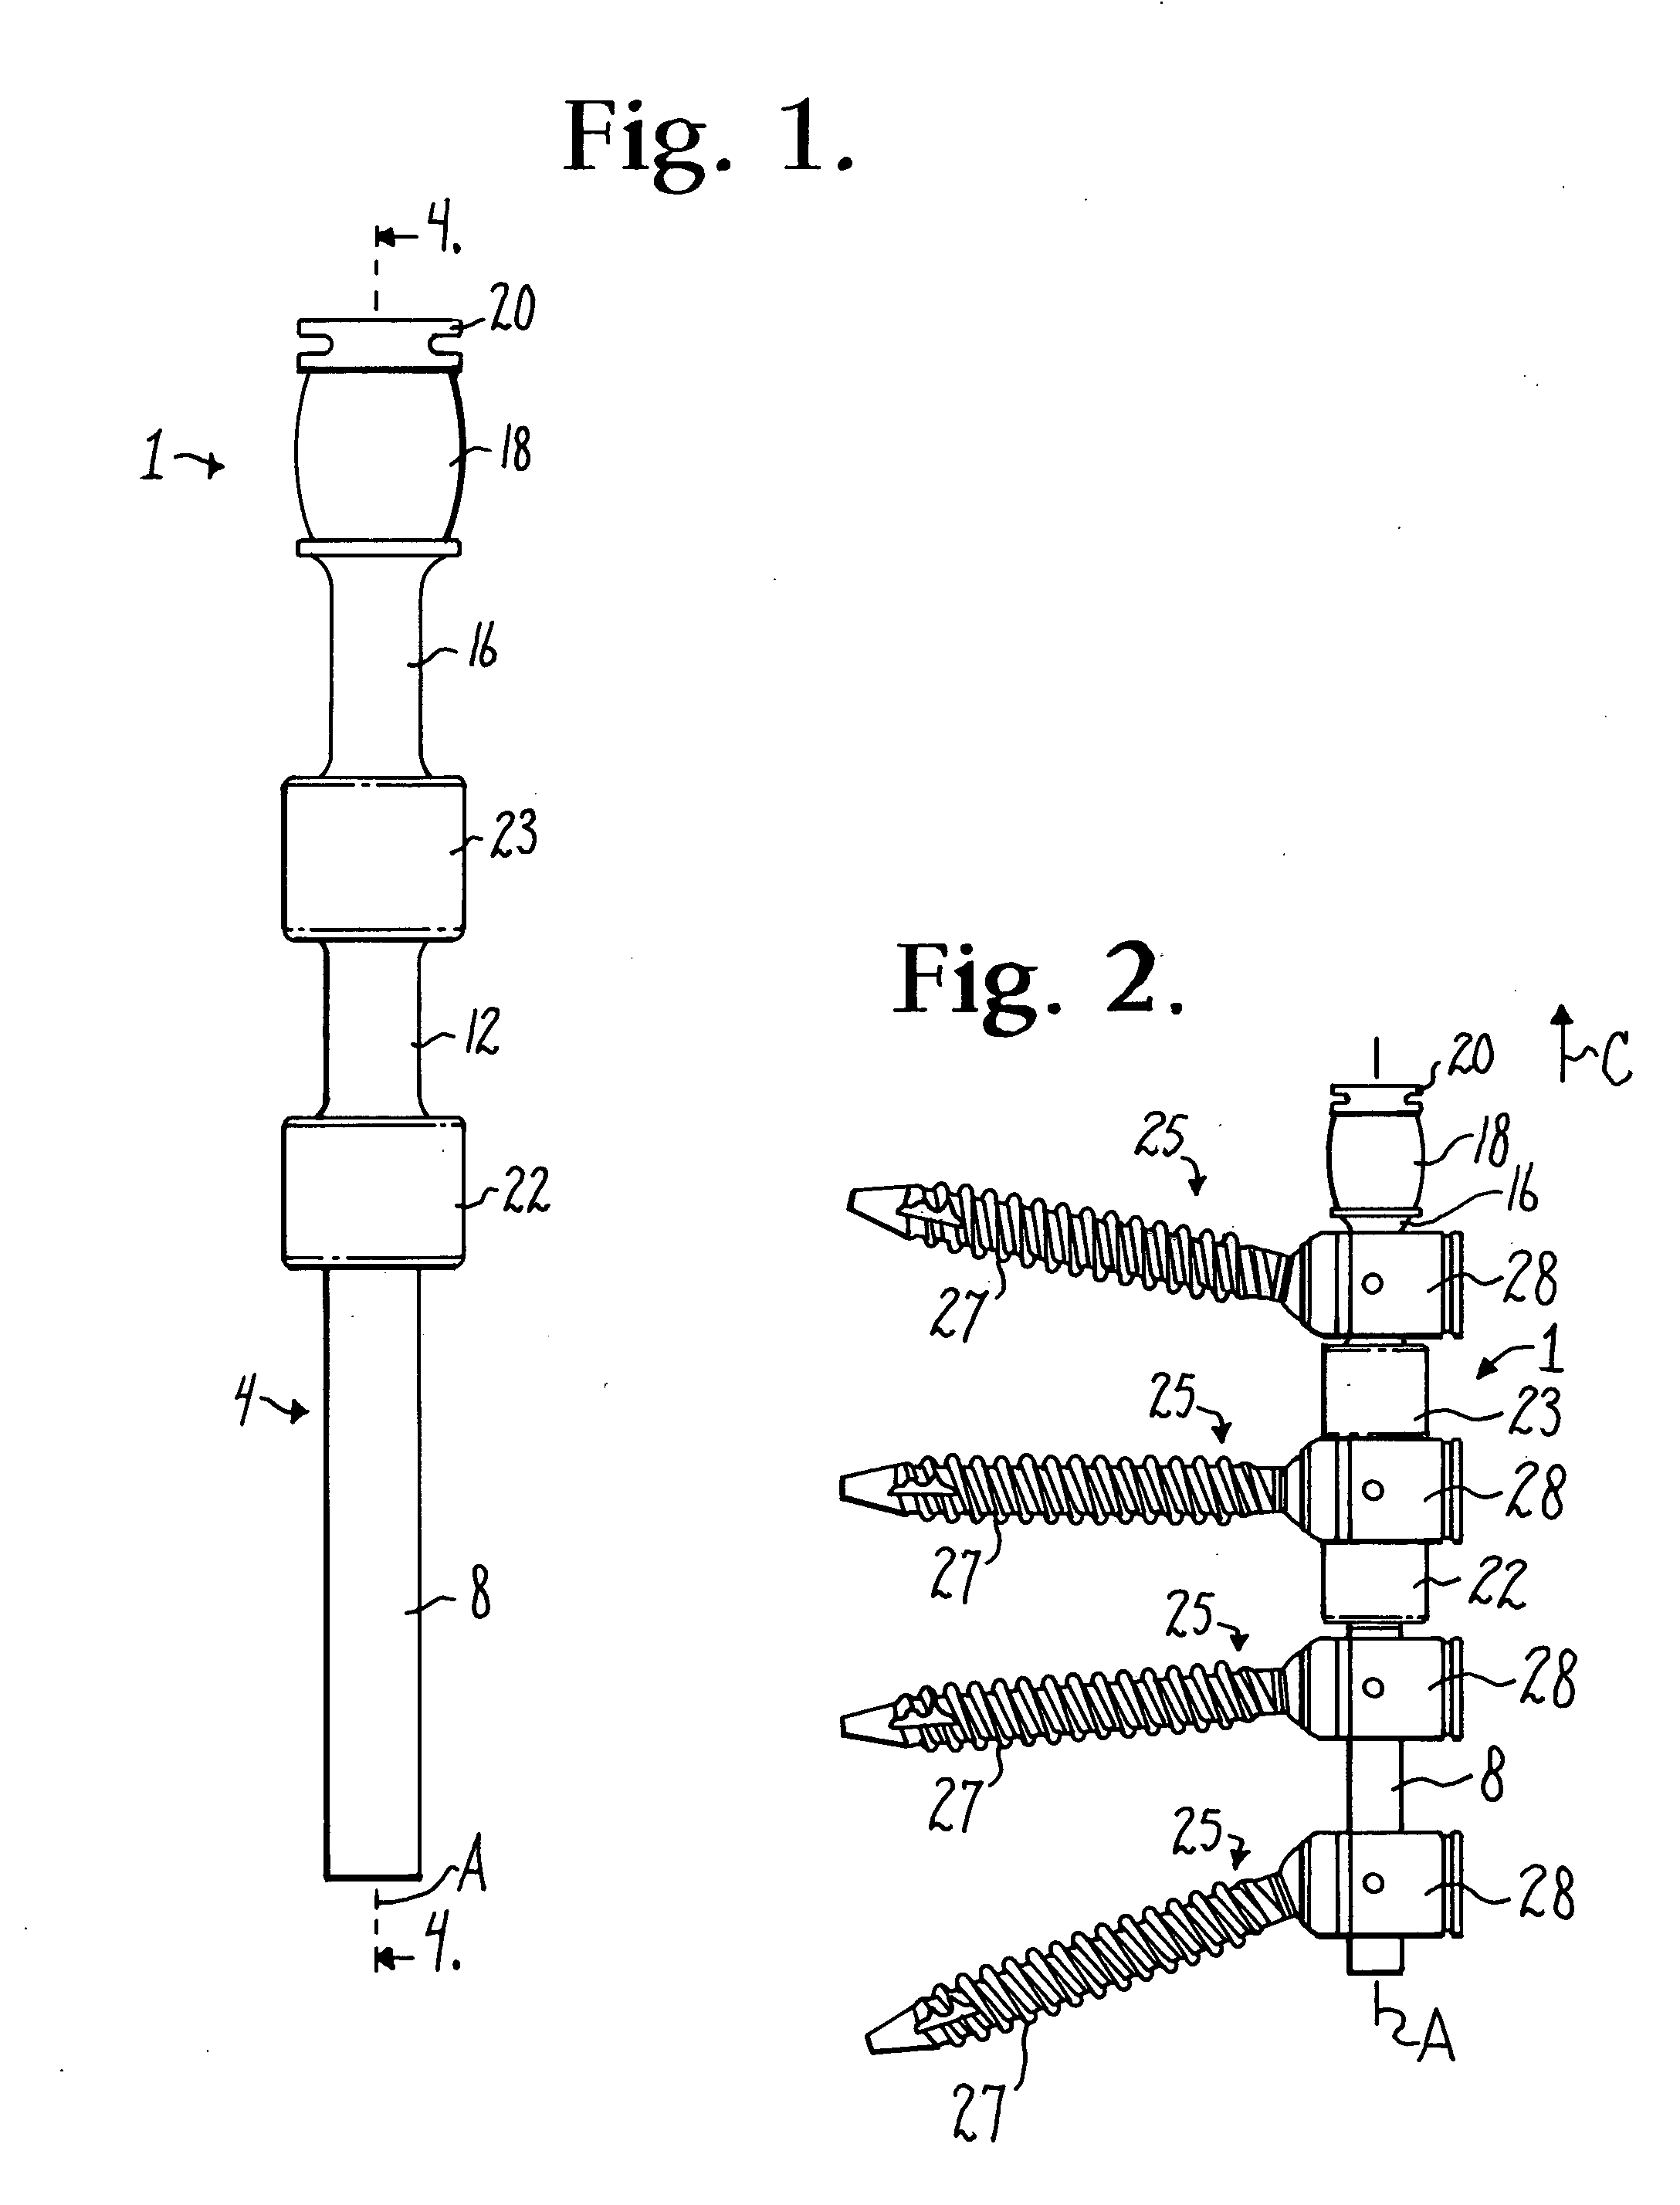 Dynamic stabilization assembly having pre-compressed spacers with differential displacements